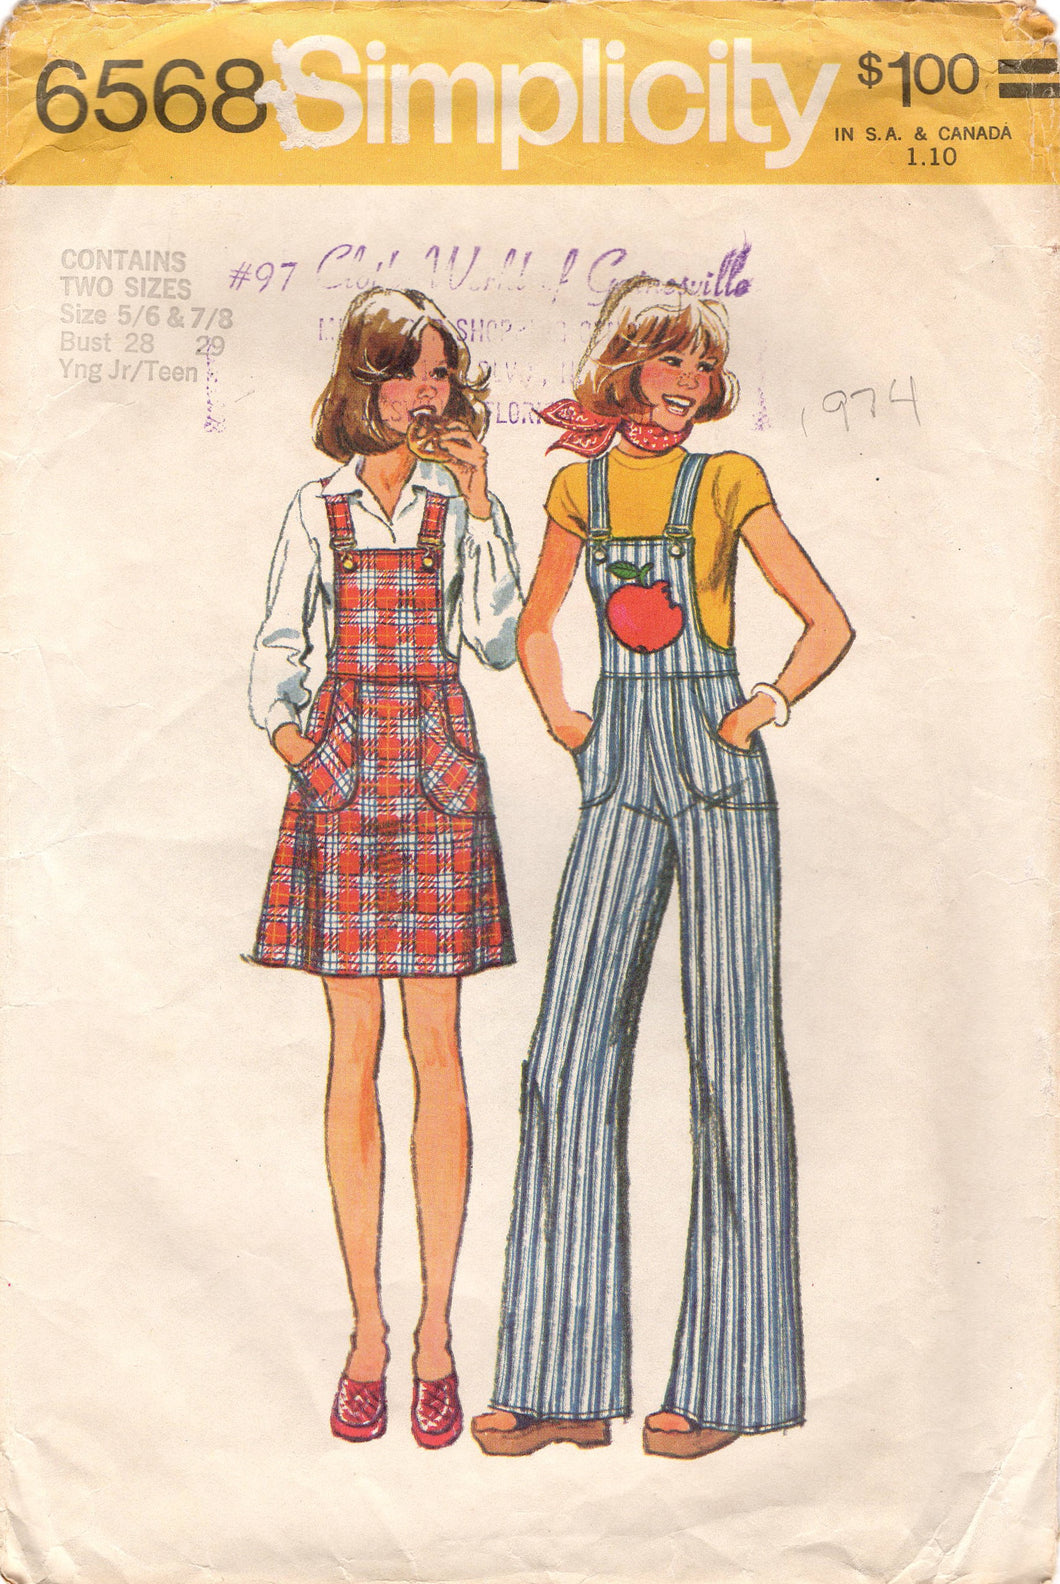 1970's Simplicity Overalls and Overall Jumper - Bust 28-29